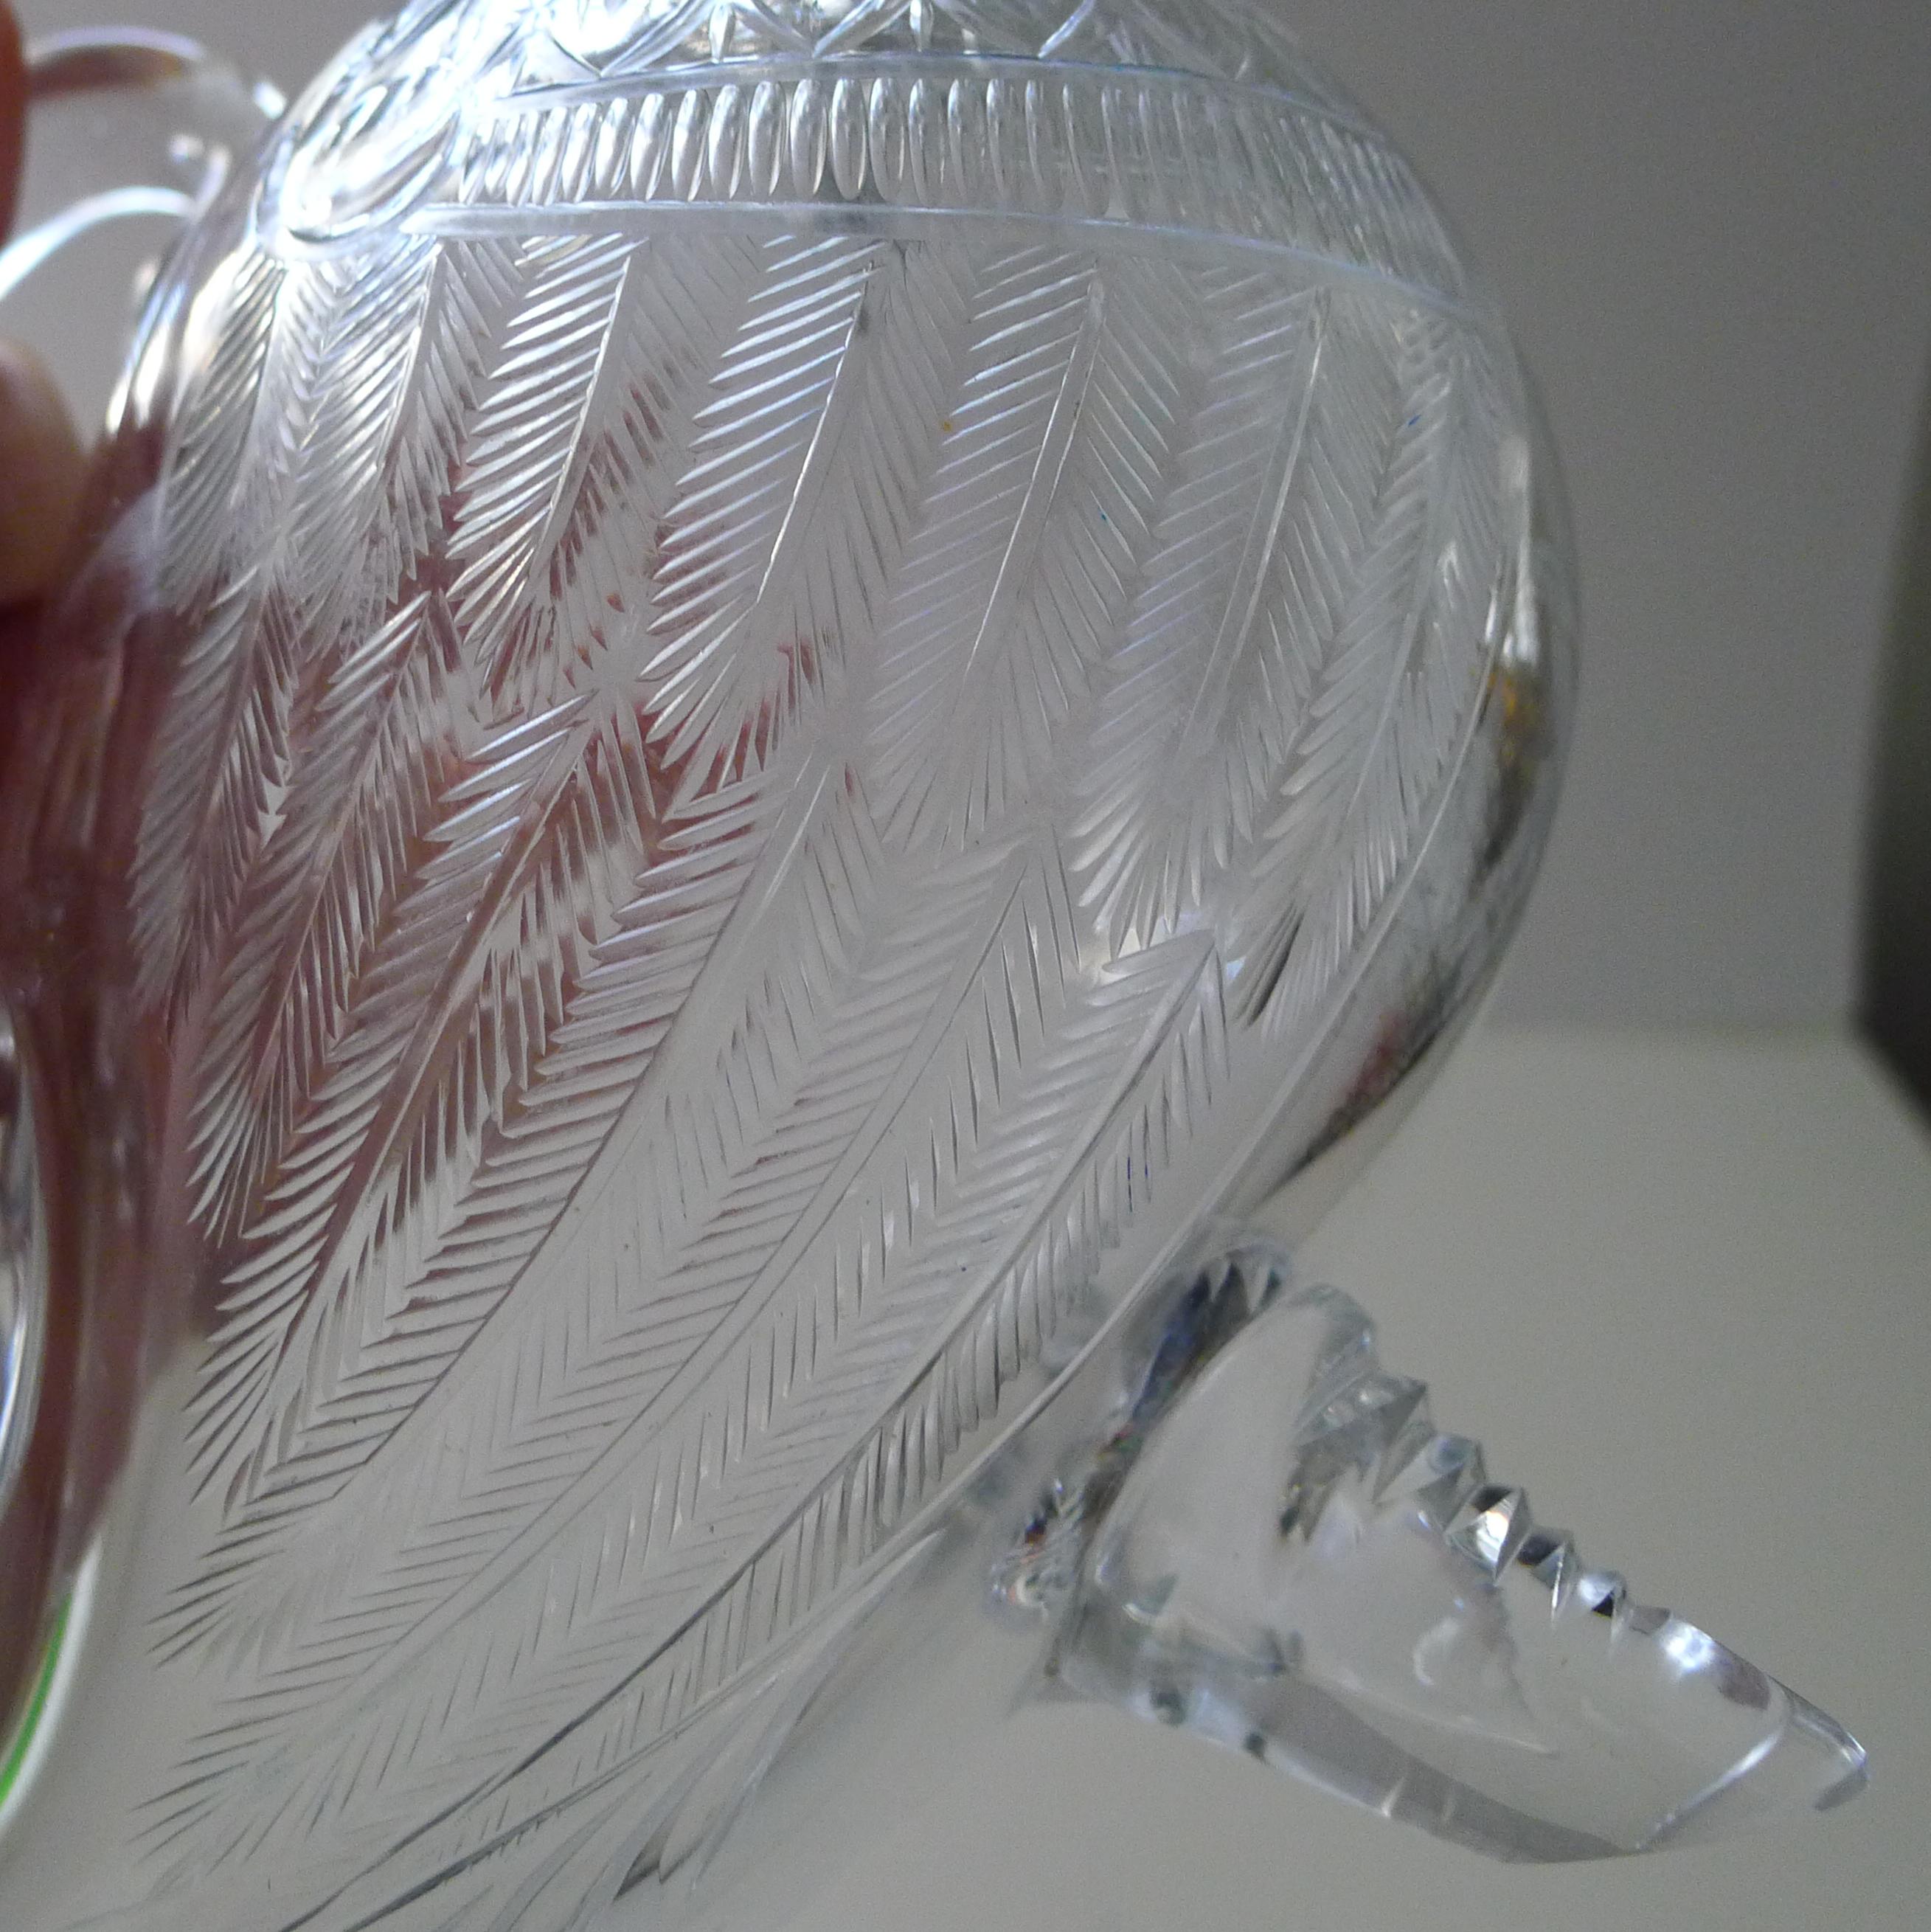 A magnificent and rare English cut glass novelty decanter / claret jug in the form of a charming duck.

The body is beautifully hand-cut with superb detail such as the feathers. The top is again beautifully made in the from of the duck head with a